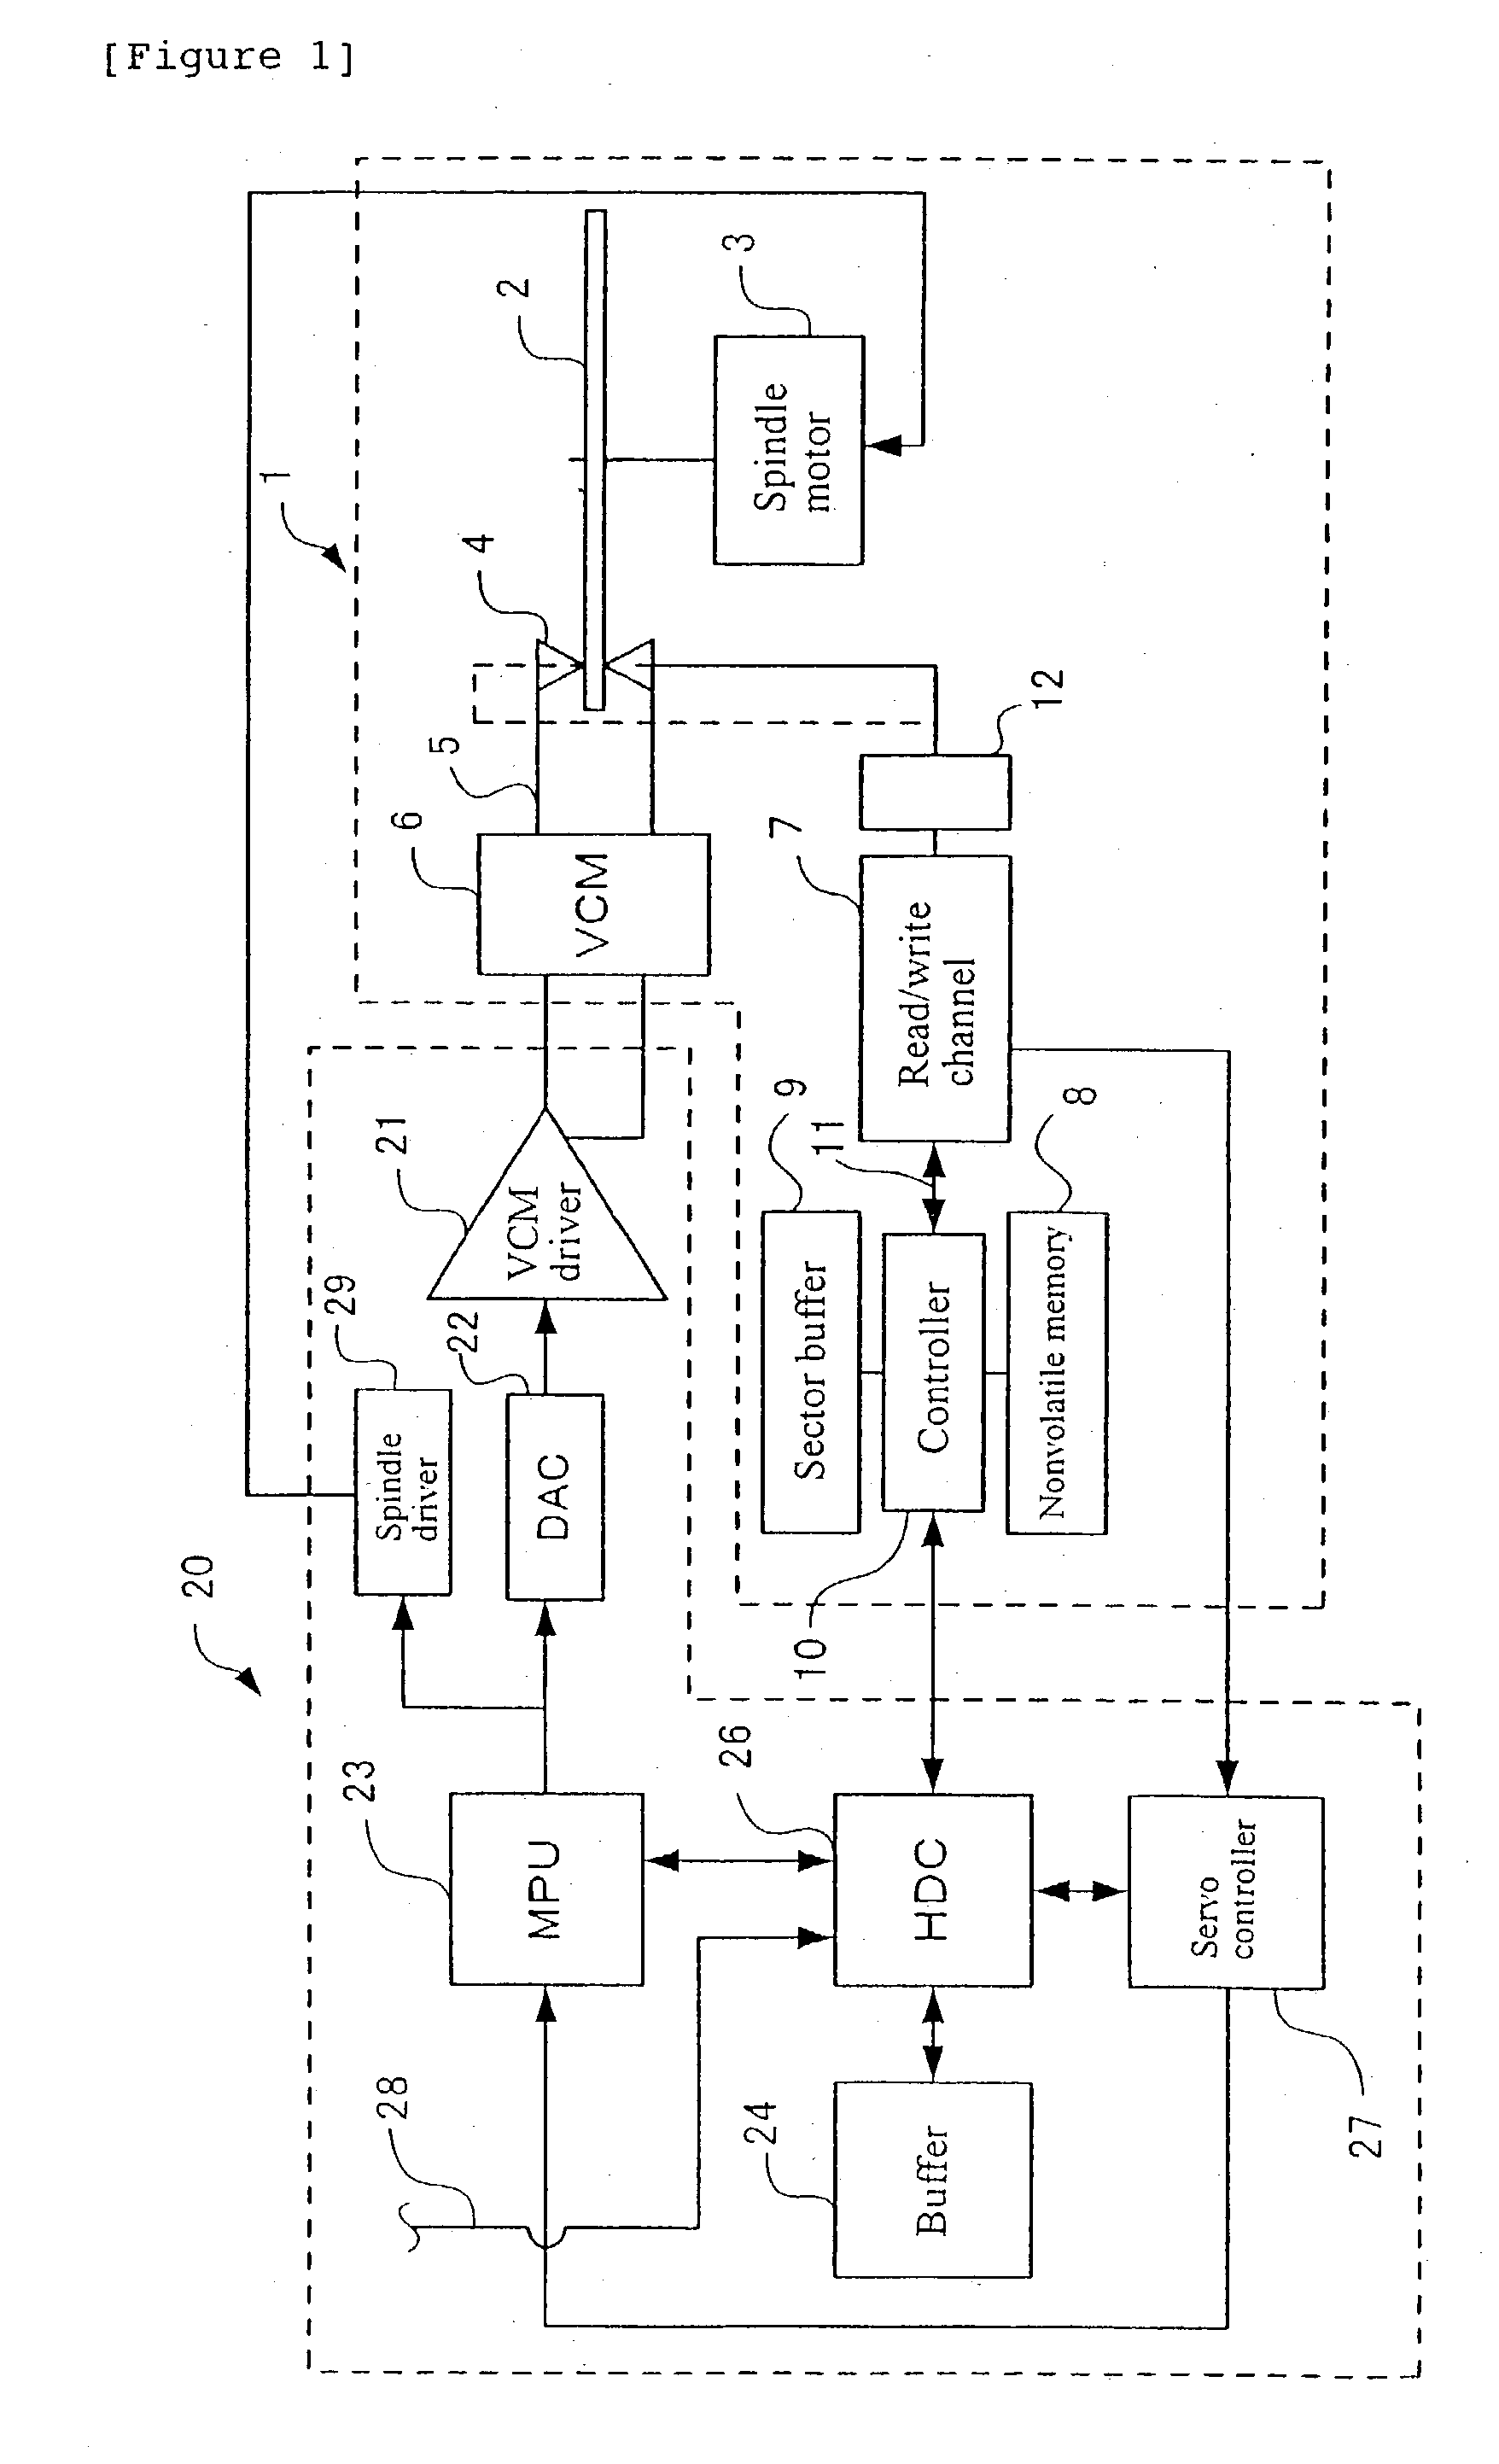 Method and apparatus for controlling data read/write between a hard disk and a hard disk controller